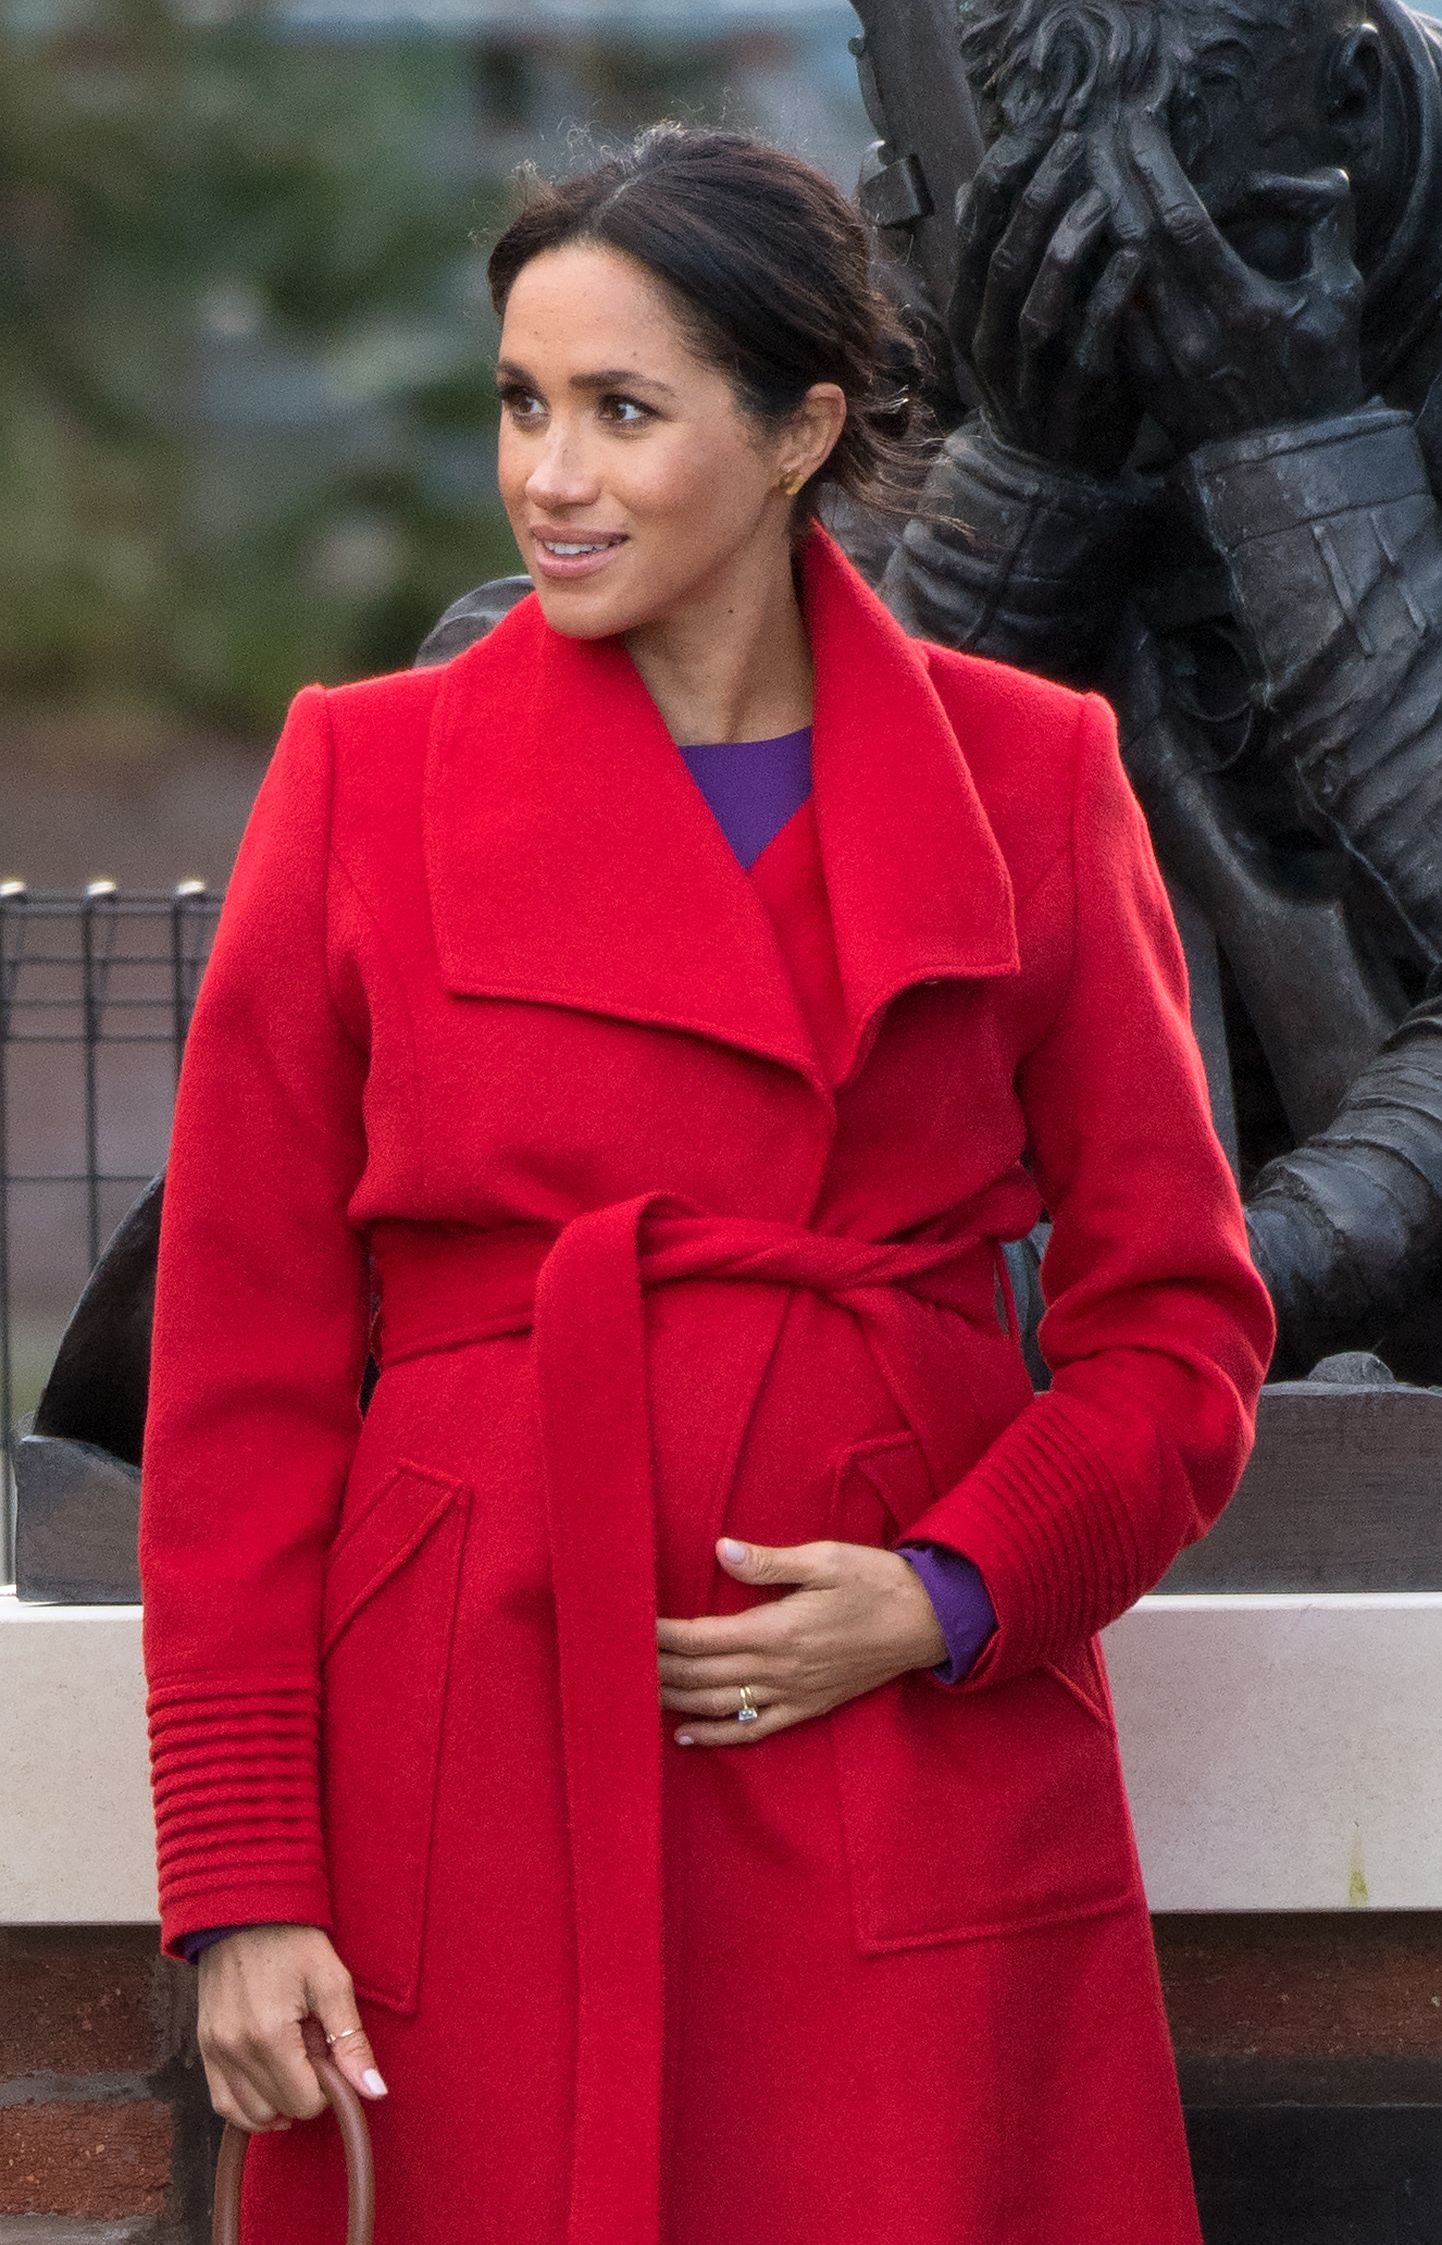 The Duchess of Sussex during a visit to Birkenhead